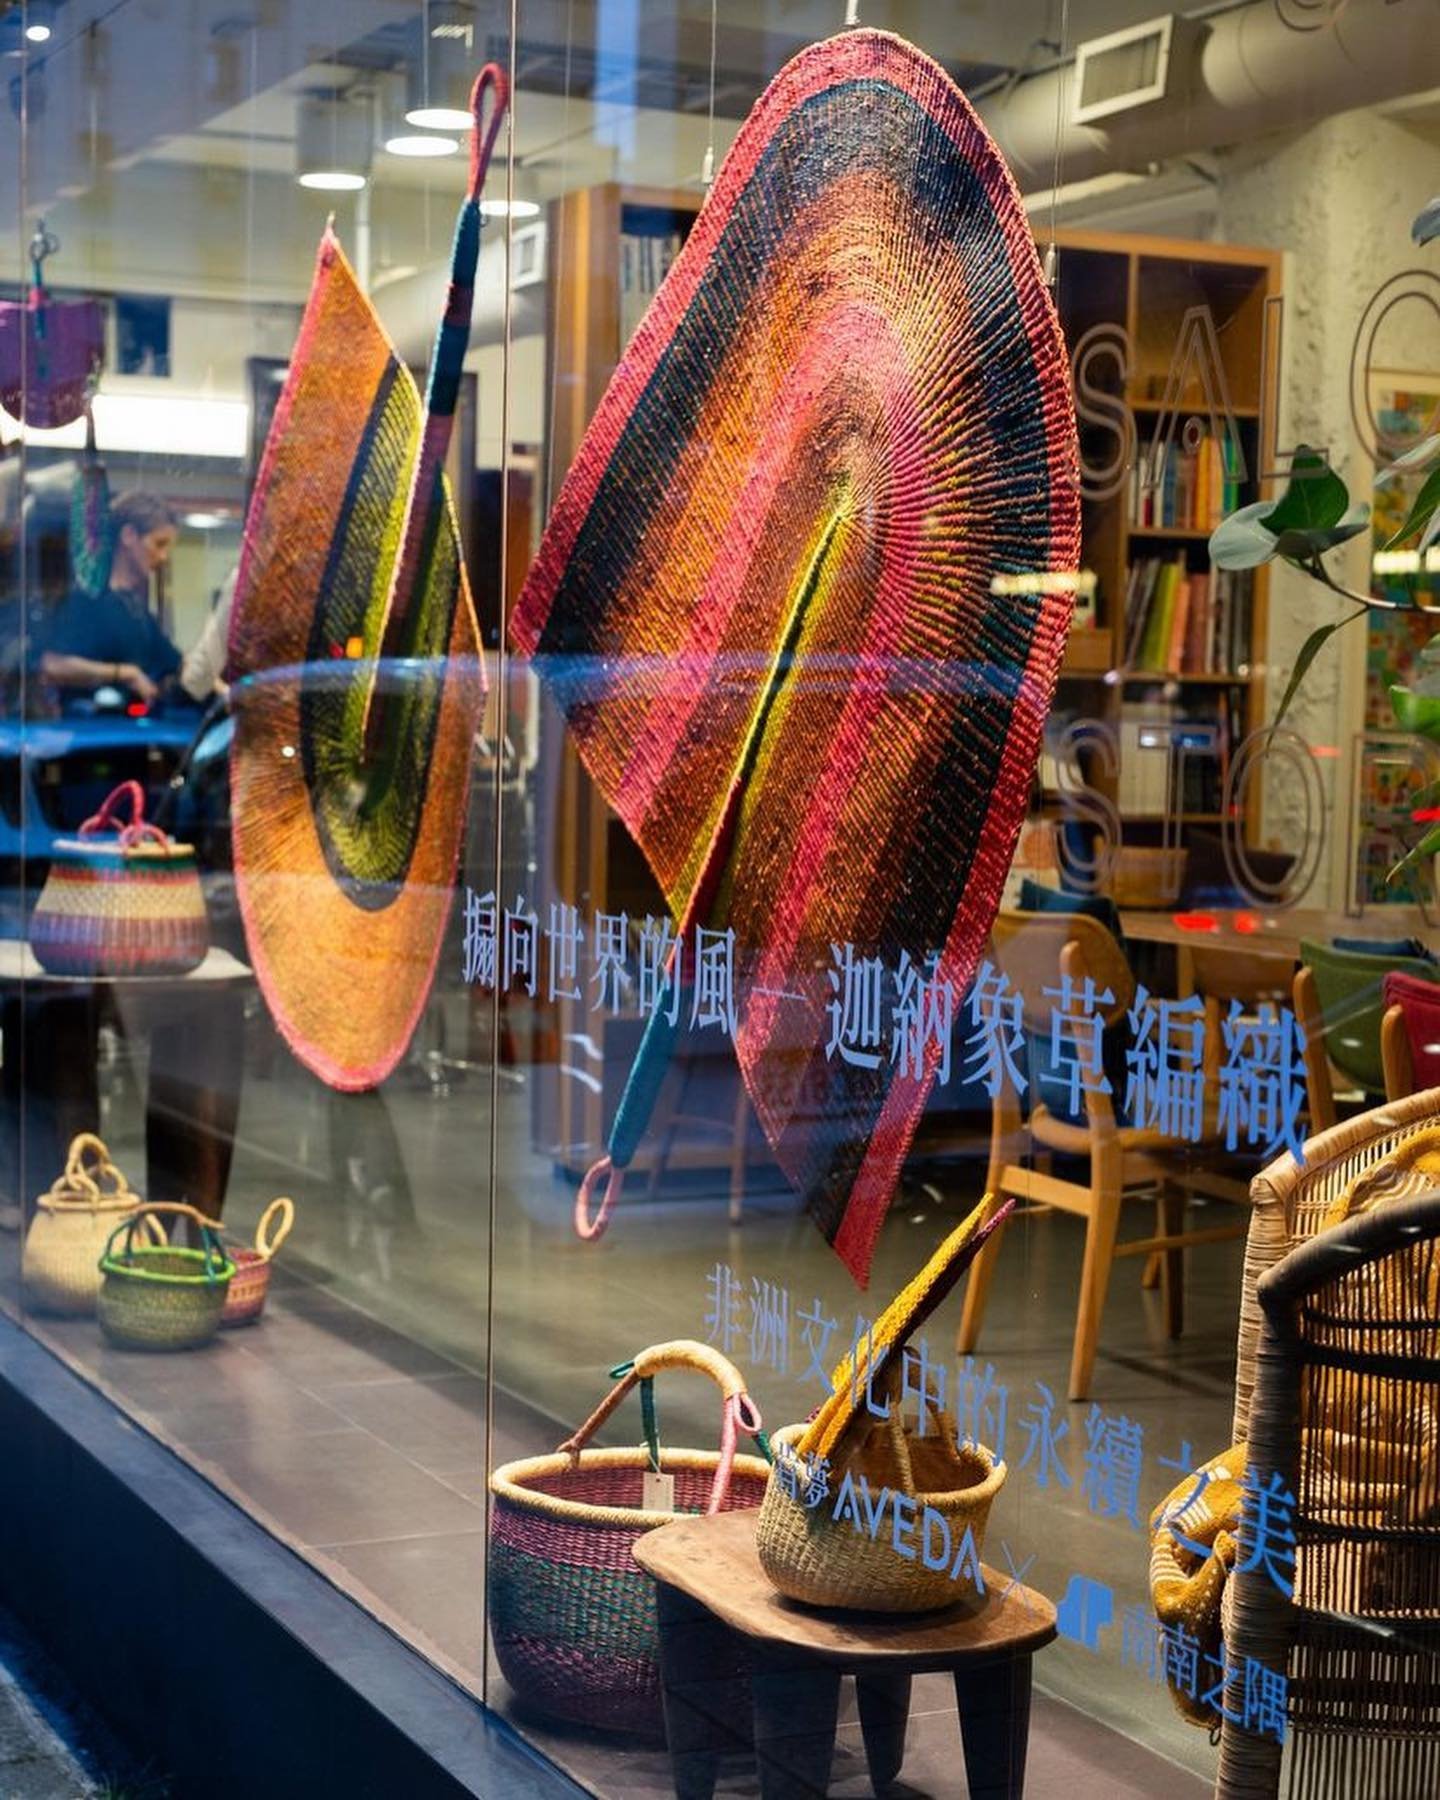 A COLLABORATION WITH SOUSOU CORNER &amp; AVEDA IN TAIWAN! 🌟

One of our latest collaborations for SouSou Corner showcases the magnitude and surreal skills of our artisans, who crafted this oversized statement pieces  that leaves you in awe.

With su